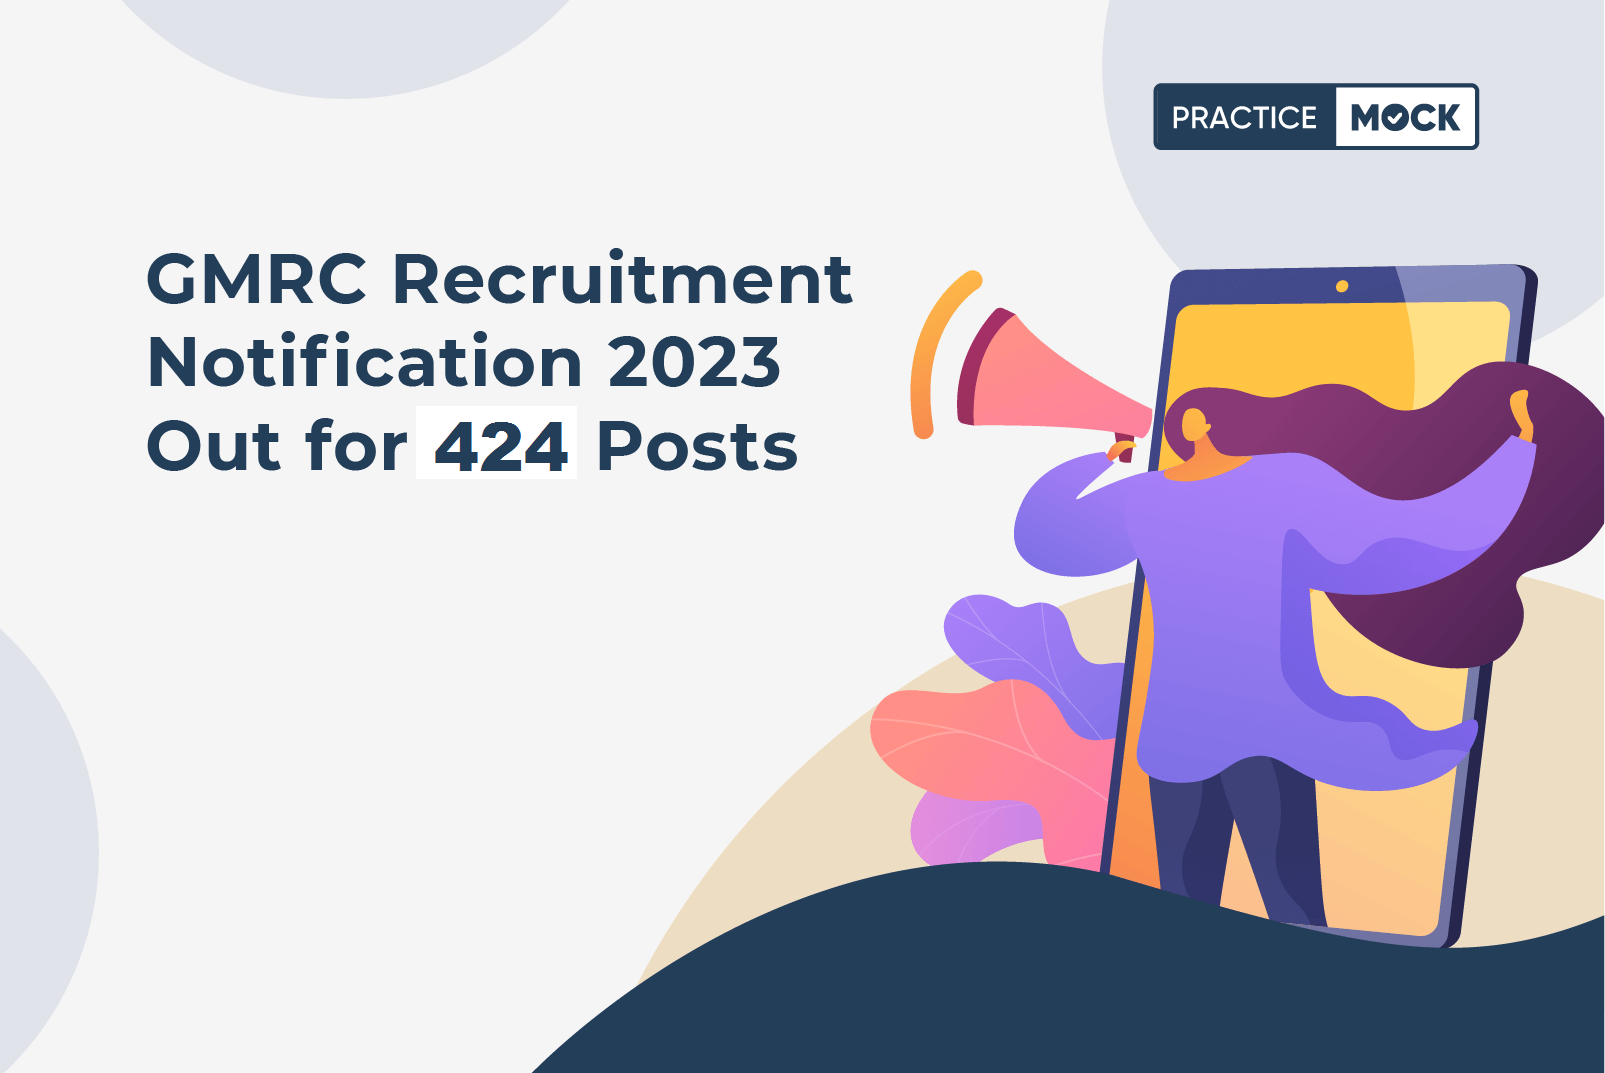 GMRC Recruitment Notification 2023 Out for 424 Posts